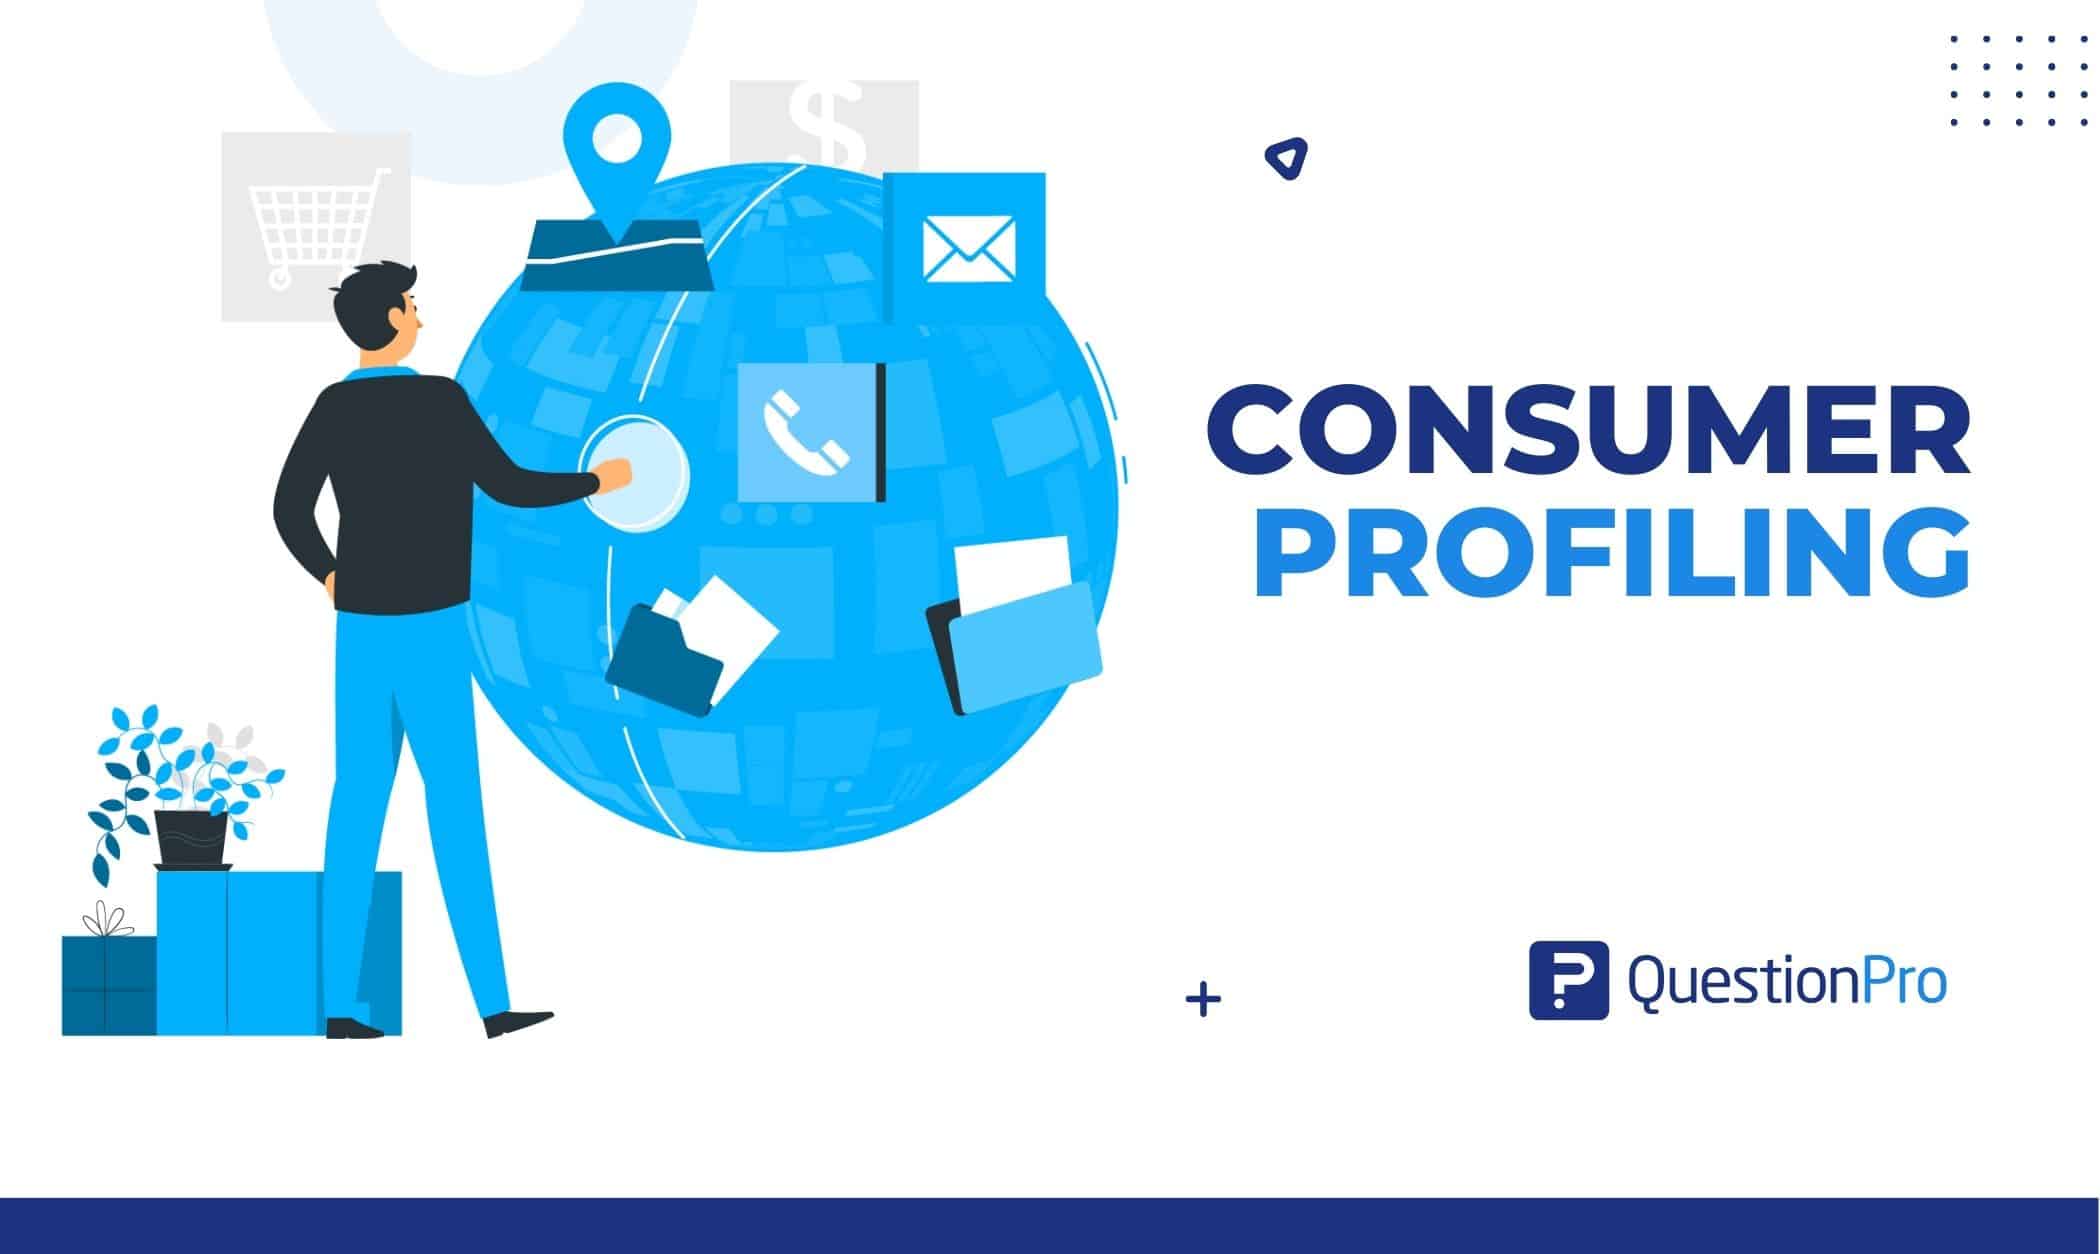 Consumer profiling is a way to give specific information about a target market & assist businesses in gaining understanding of their clients.